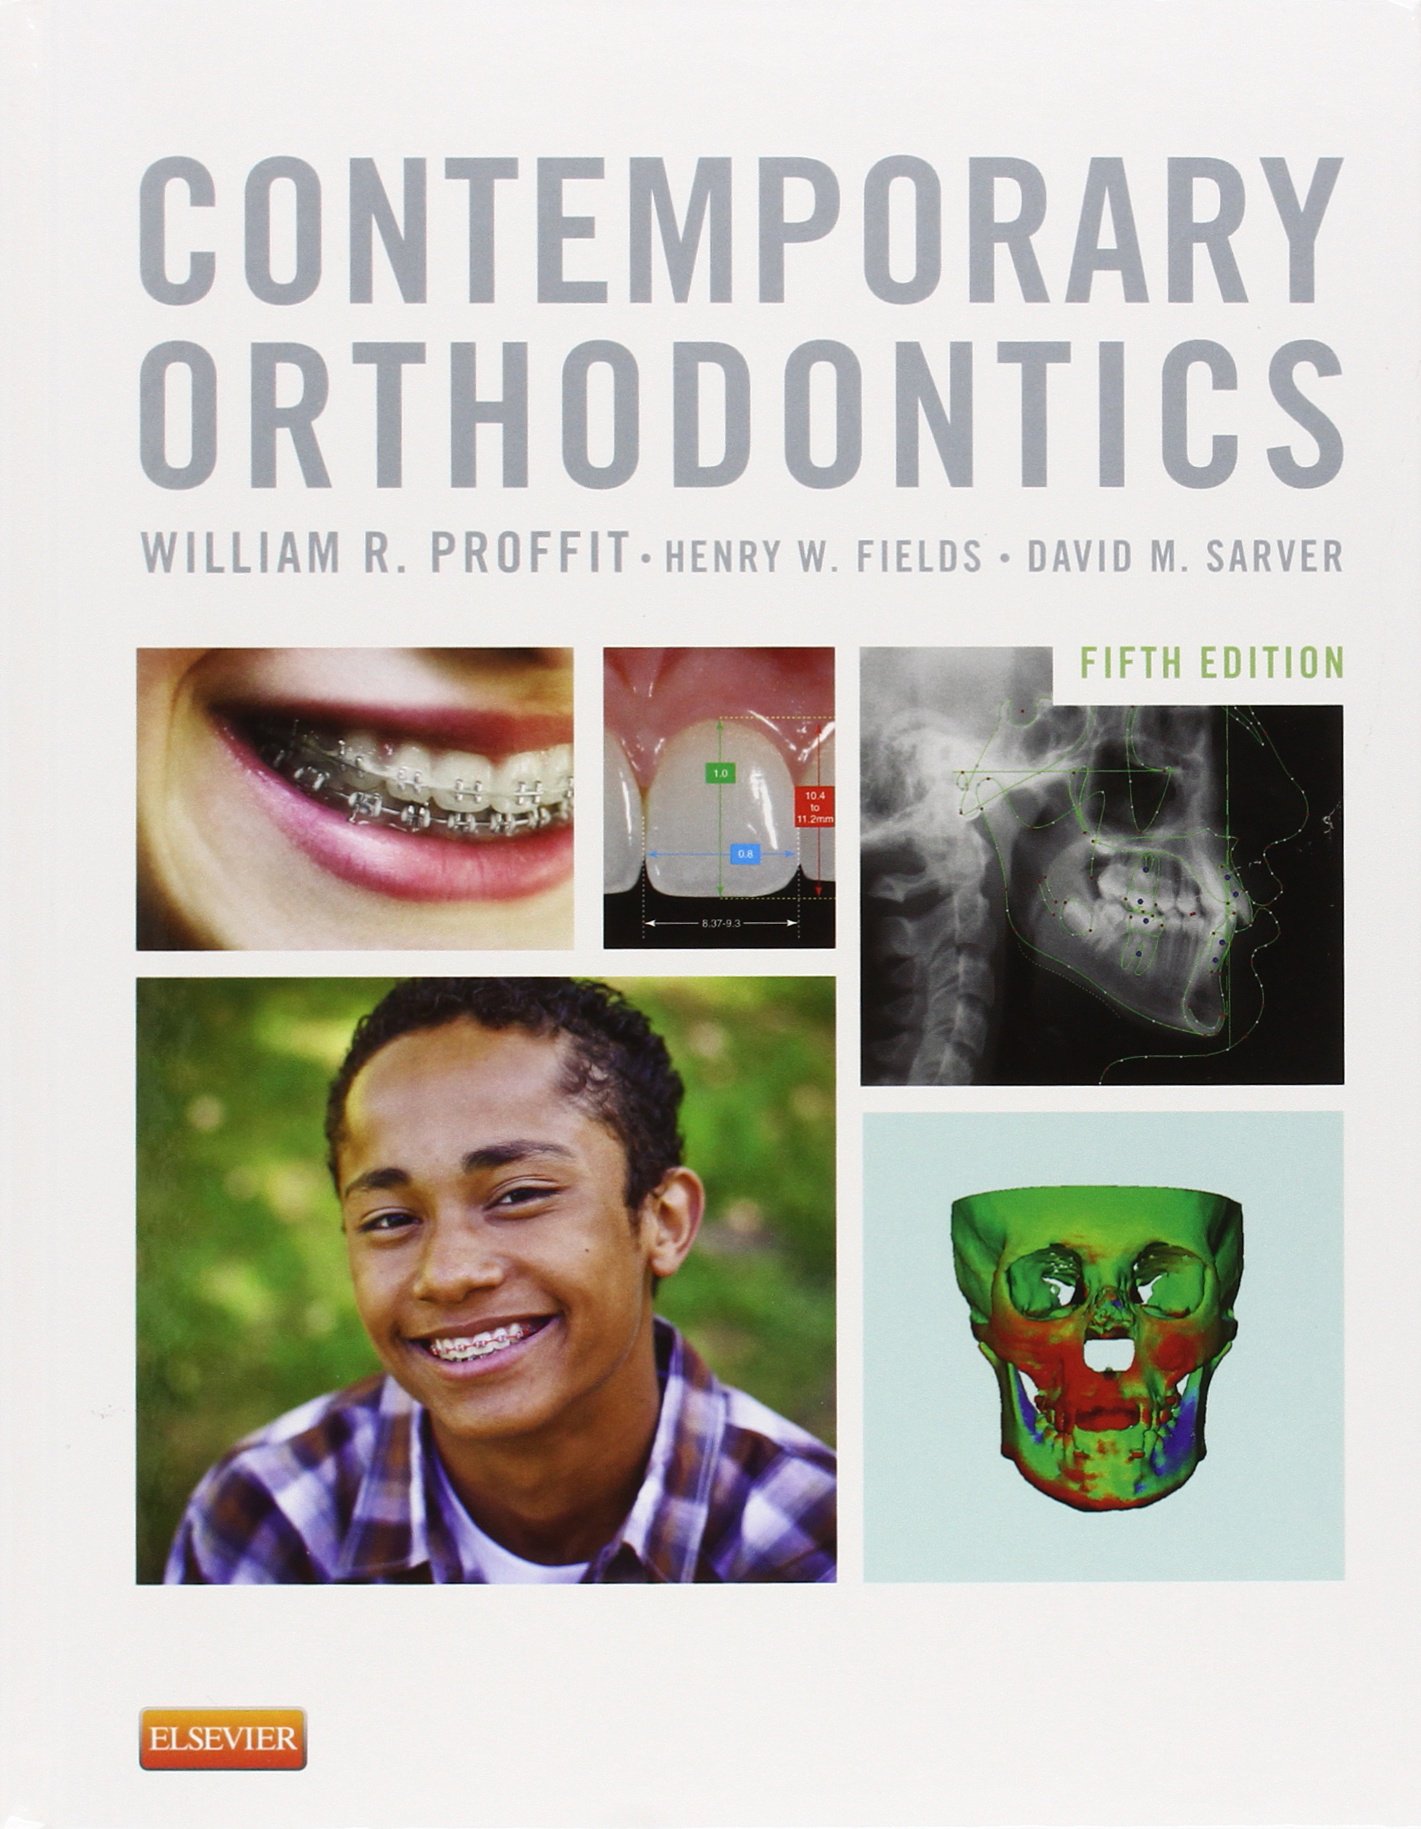 Contemporary Orthodontics 5th Edition by William R. Proffit DDS PhD (Author), Henry Fields DDS MS MSD (Author)